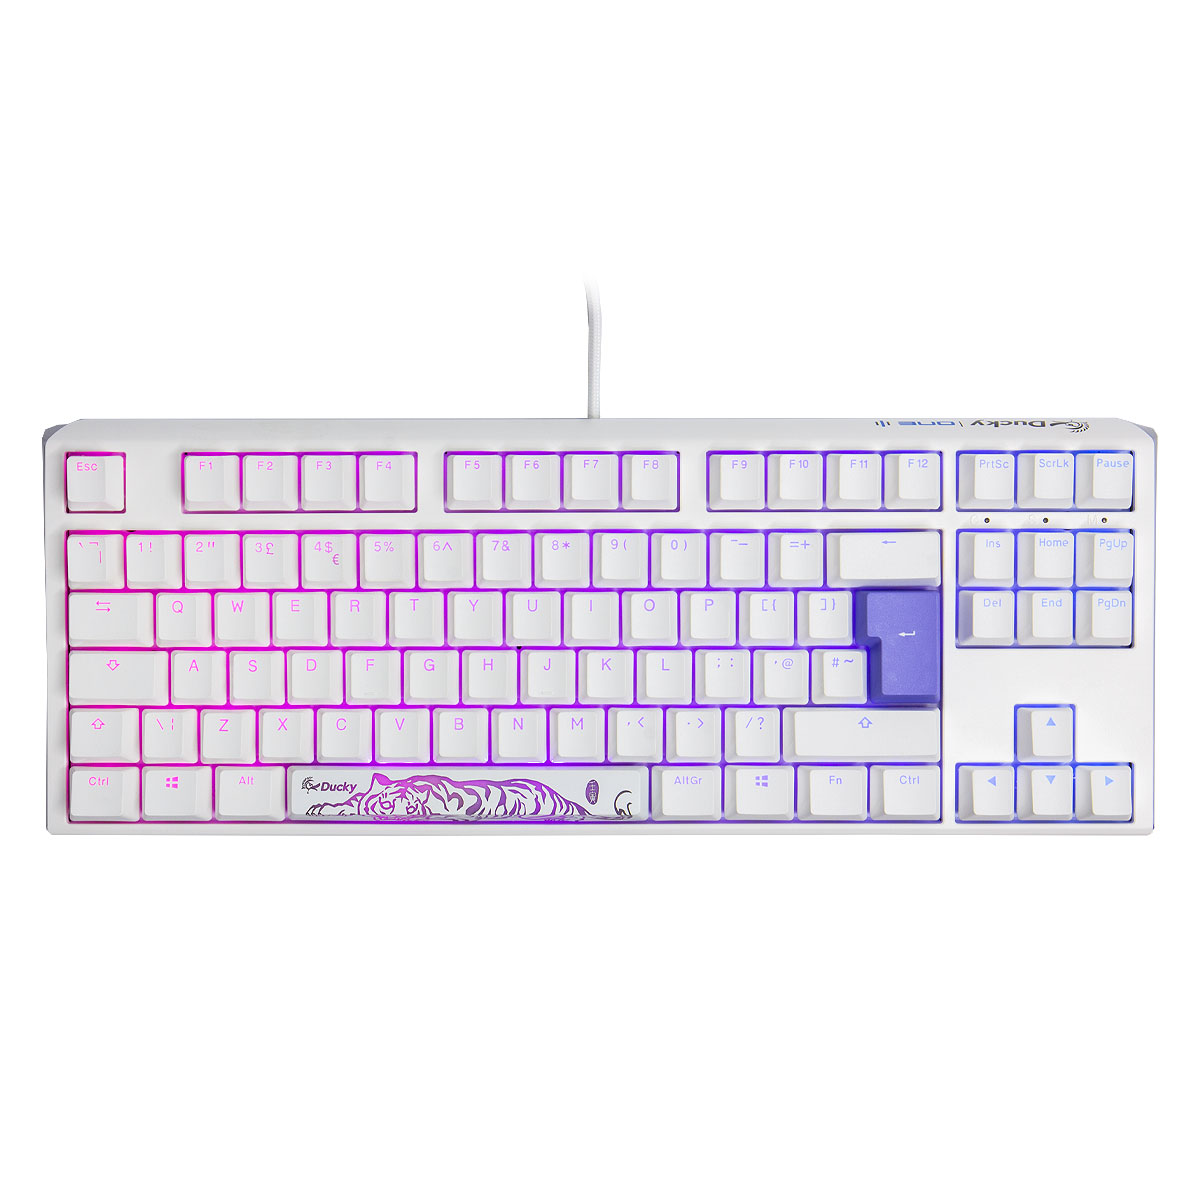 Ducky One 3 Classic TKL USB RGB Mechanical Gaming Keyboard Cherry Brown - Pure White UK Layout